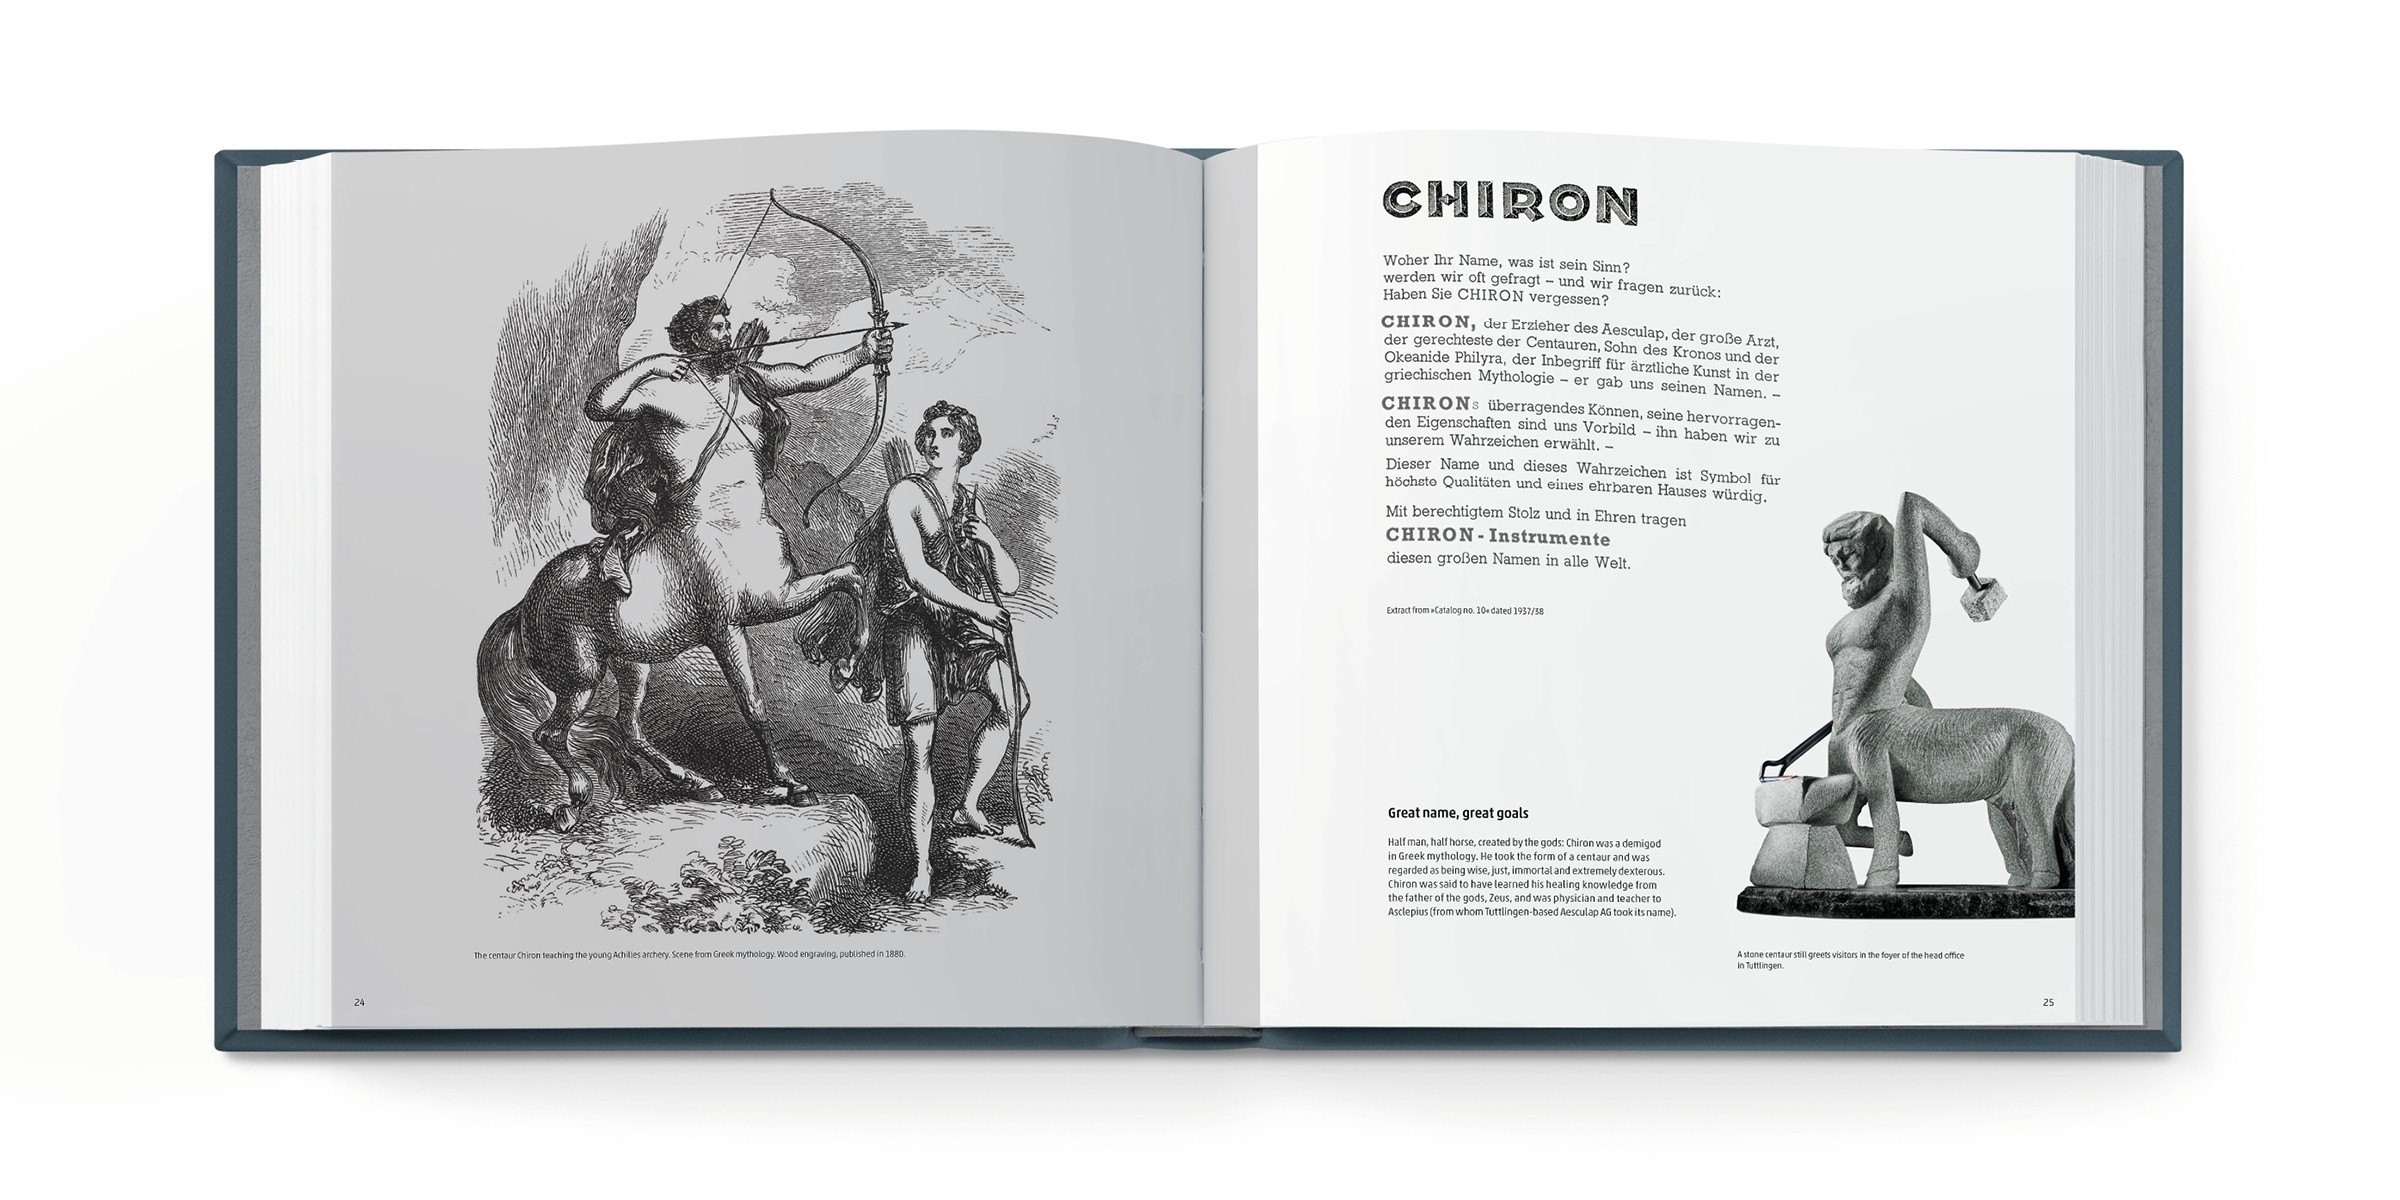 CHIRON – big name, big goals, and a symbol for top quality.